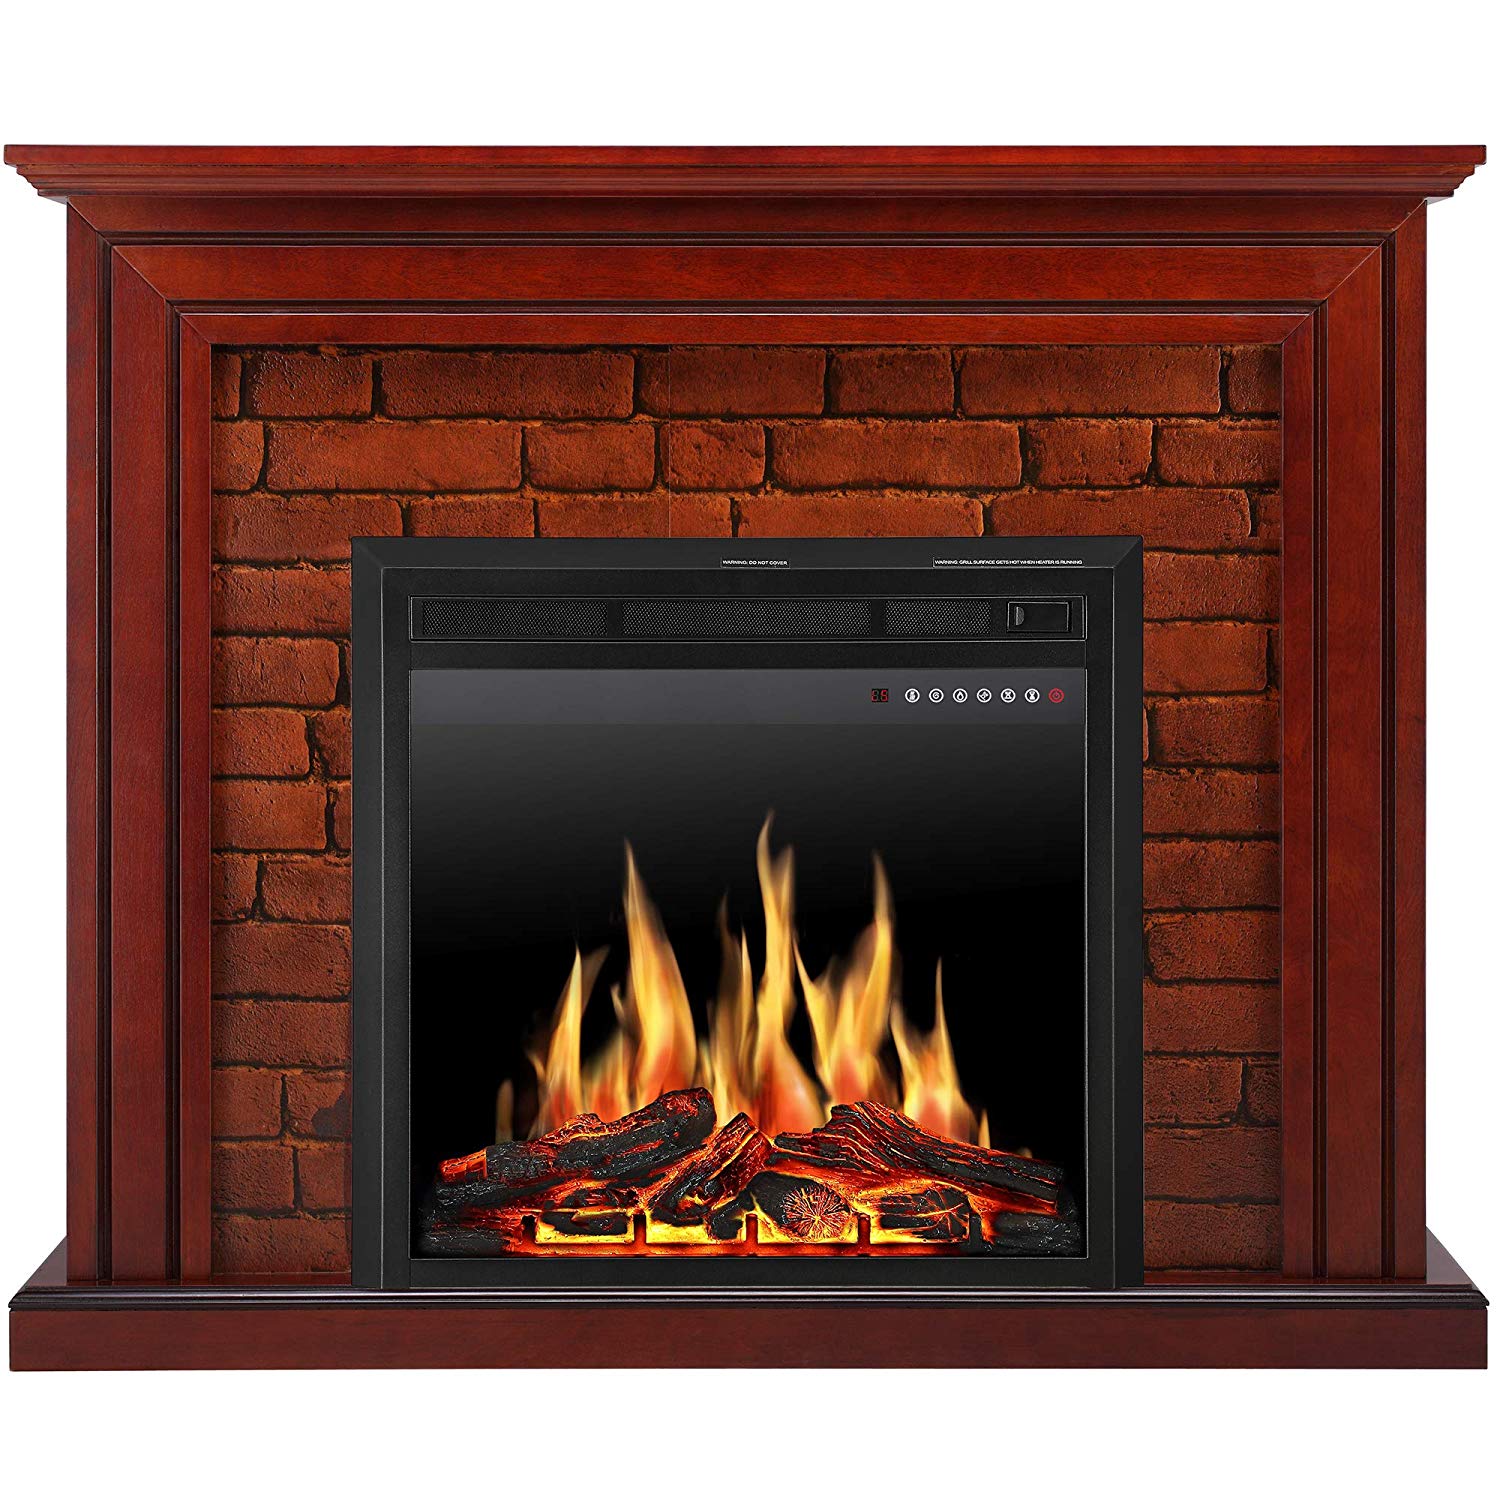 White Corner Fireplace Tv Stand Unique Jamfly Electric Fireplace Mantel Package Traditional Brick Wall Design Heater with Remote Control and Led touch Screen Home Accent Furnishings